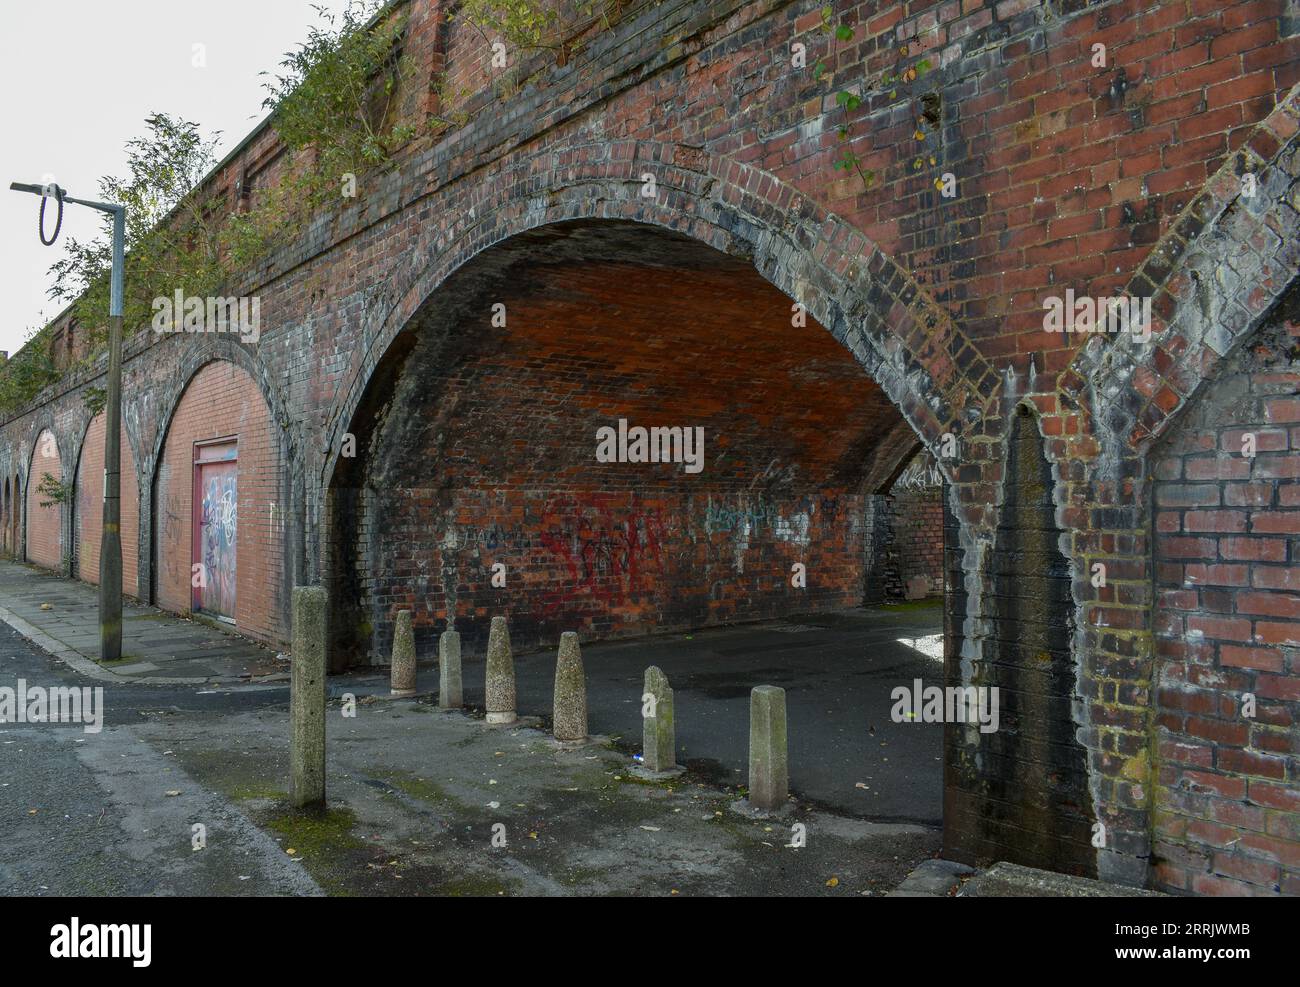 An old brick walkway covered in graffiti leading under a railway line in Barrow. Stock Photo